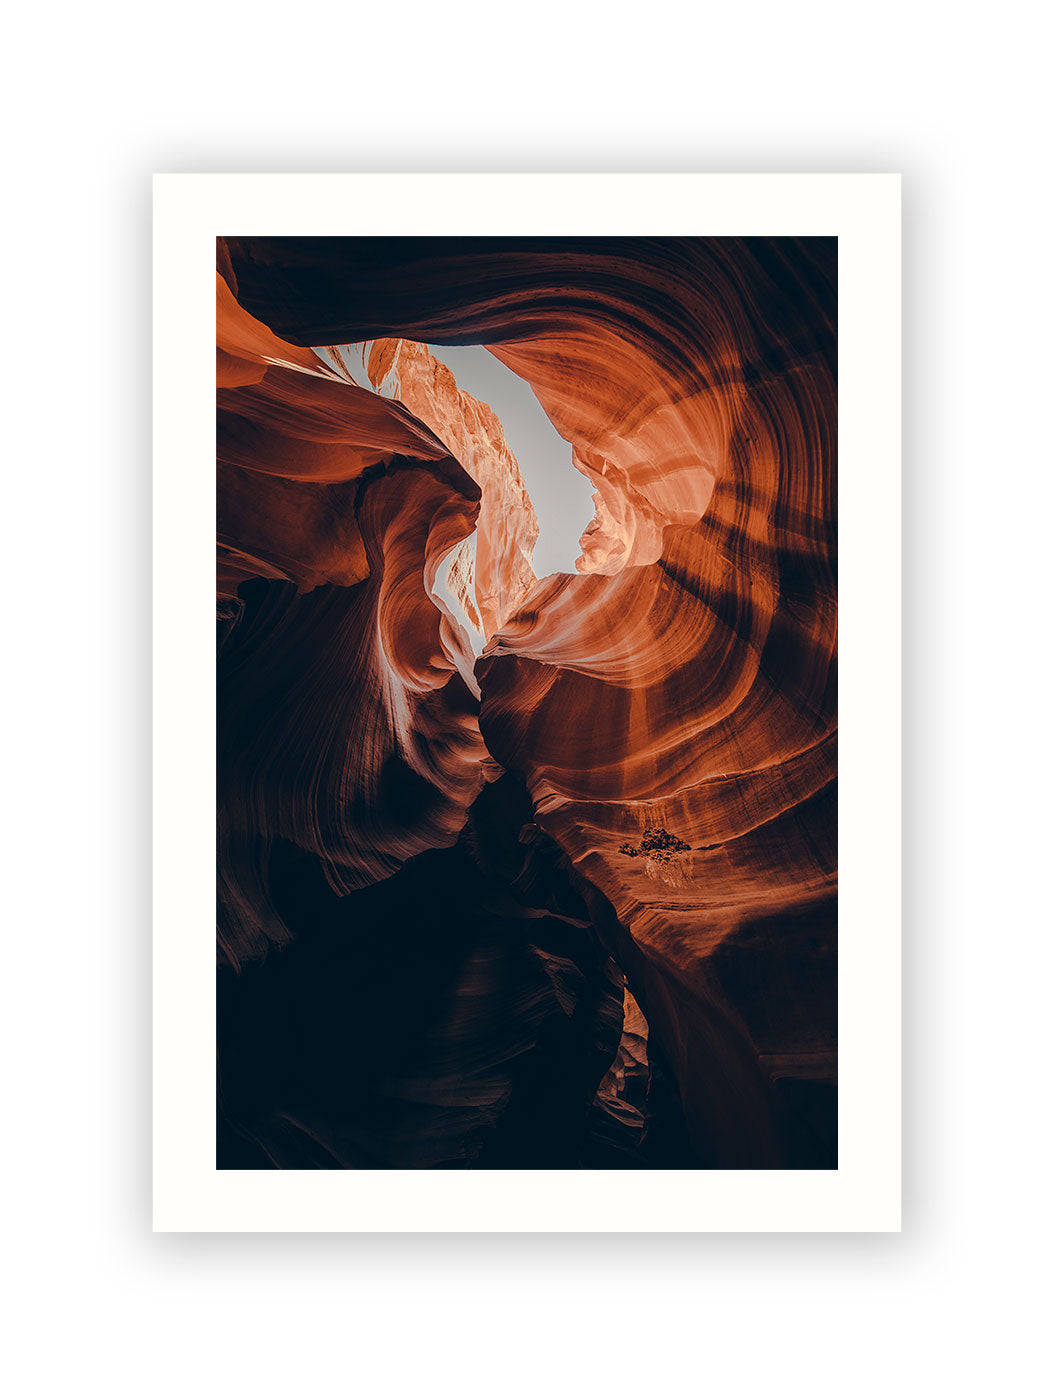 August in Upper Antelope Canyon